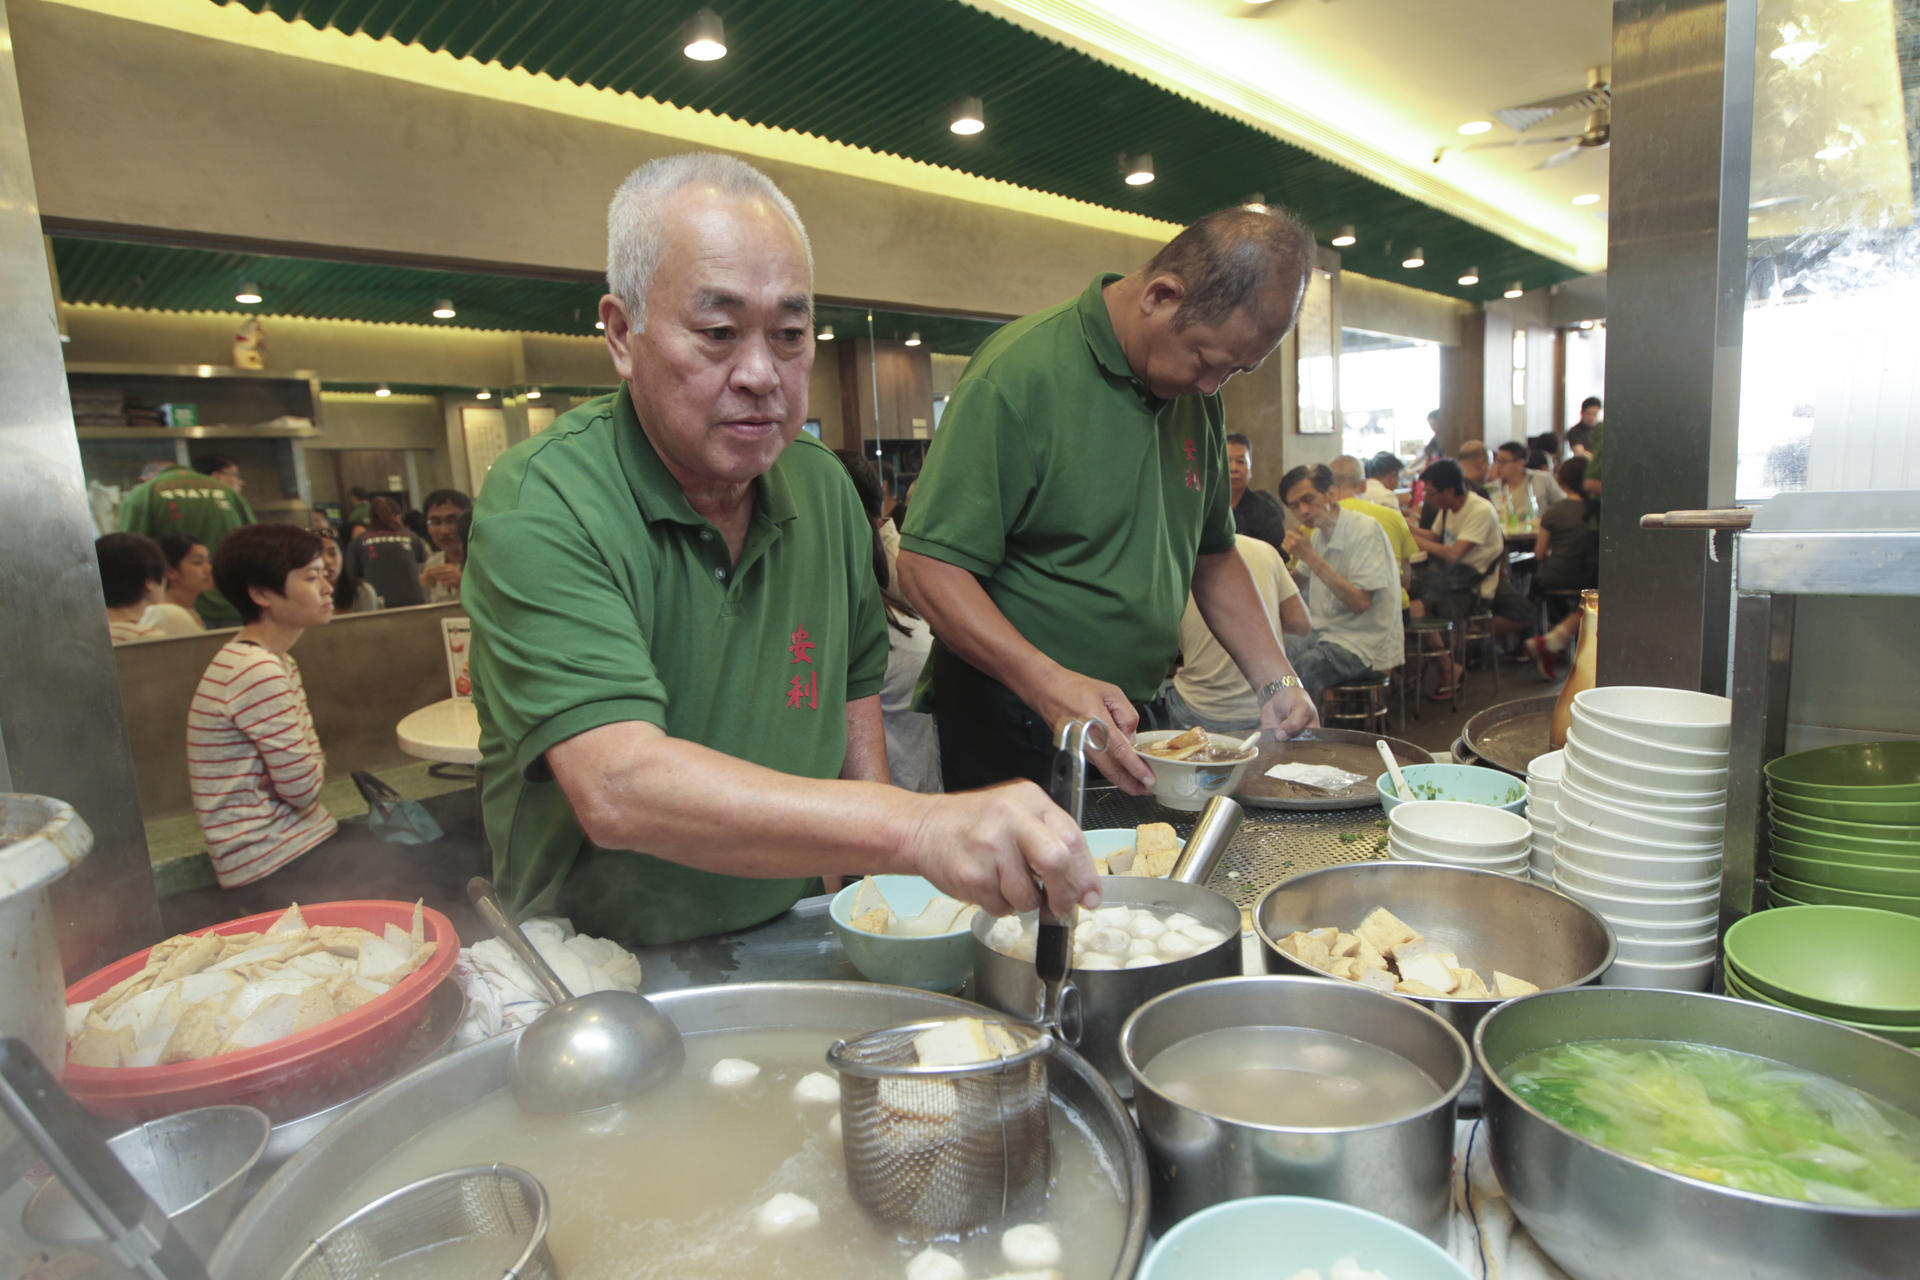 RUSH HOUR: On Lee staff feed the lunchtime crowd. Photos: Bruce Yan